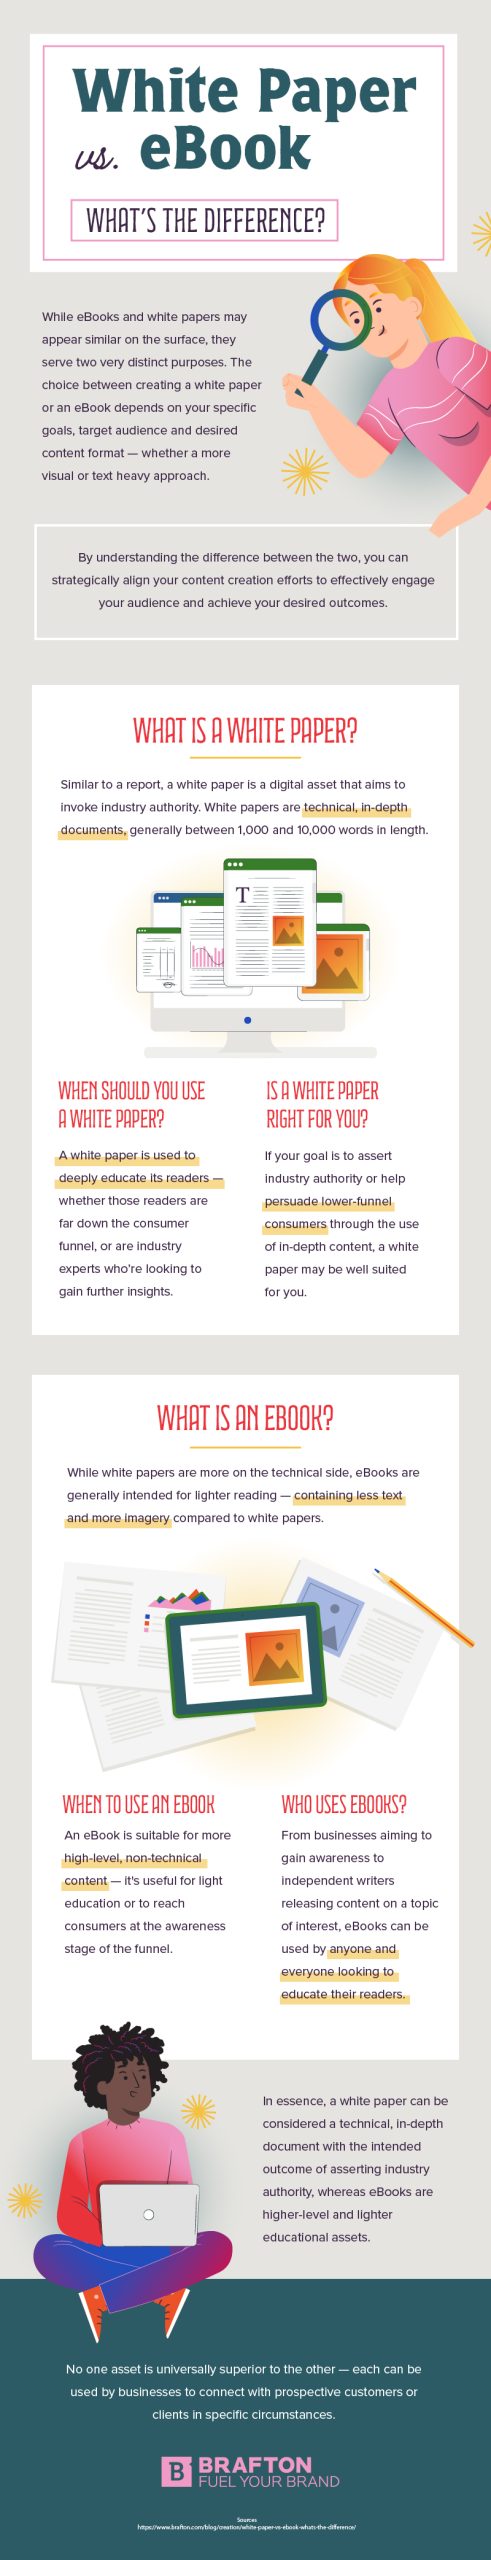 Infographic White Paper Vs. eBook- What's the Difference